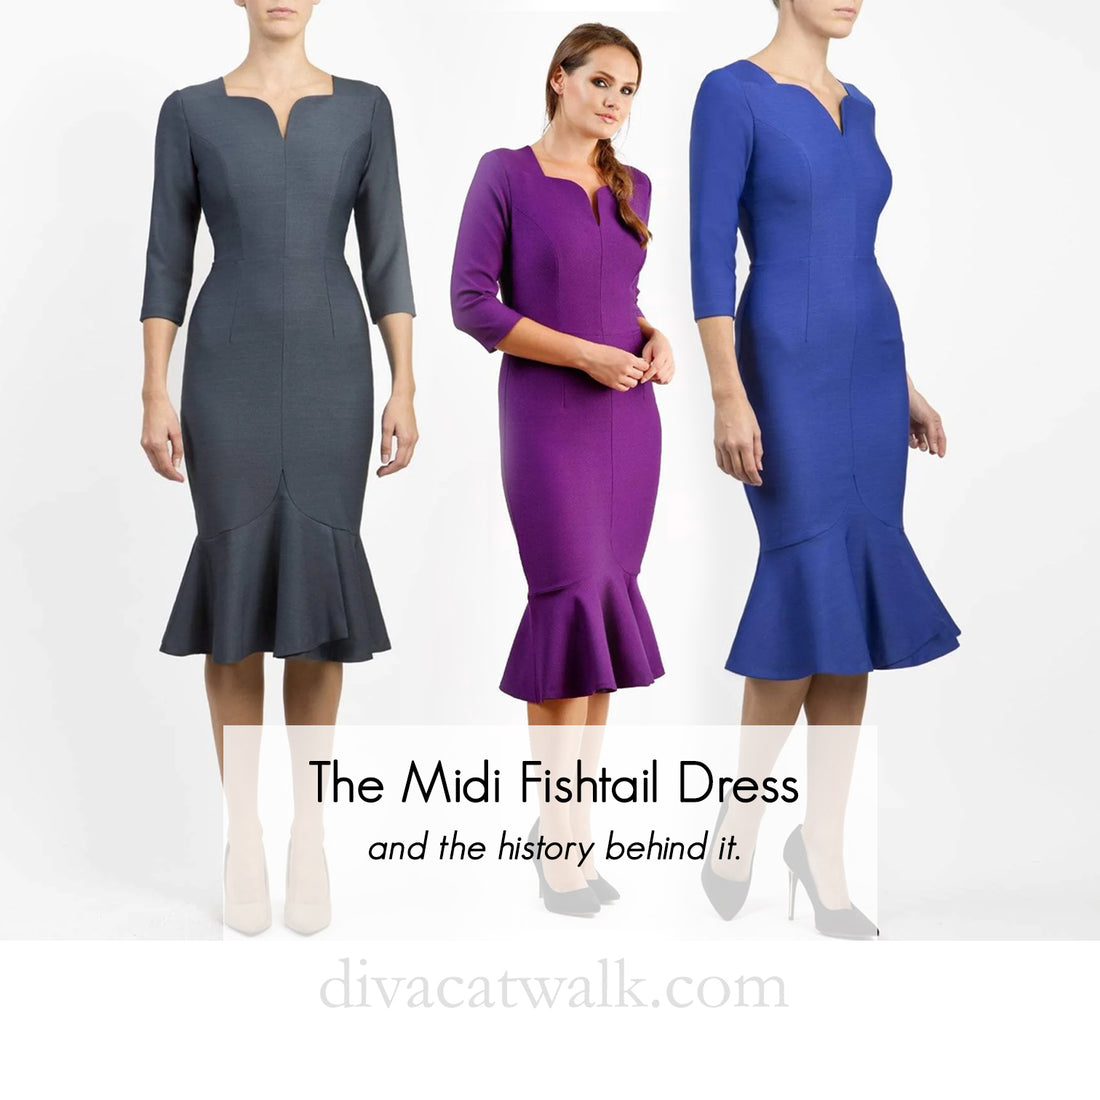 The Midi Fishtail Dress and the History Behind It.